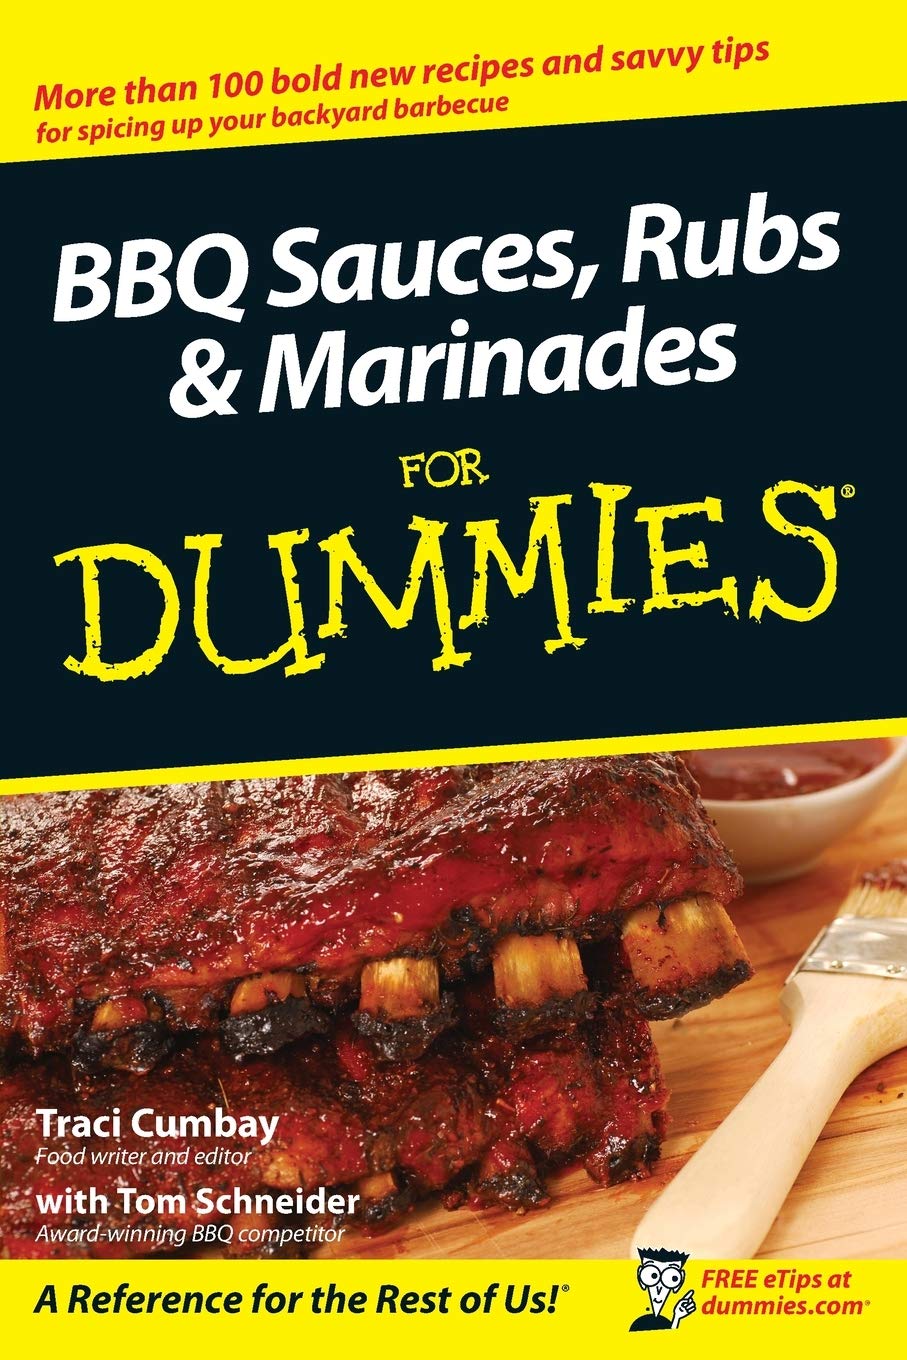 Traci Cumbay, Tom Schneider - BBQ Sauces, Rubs and Marinades For Dummies